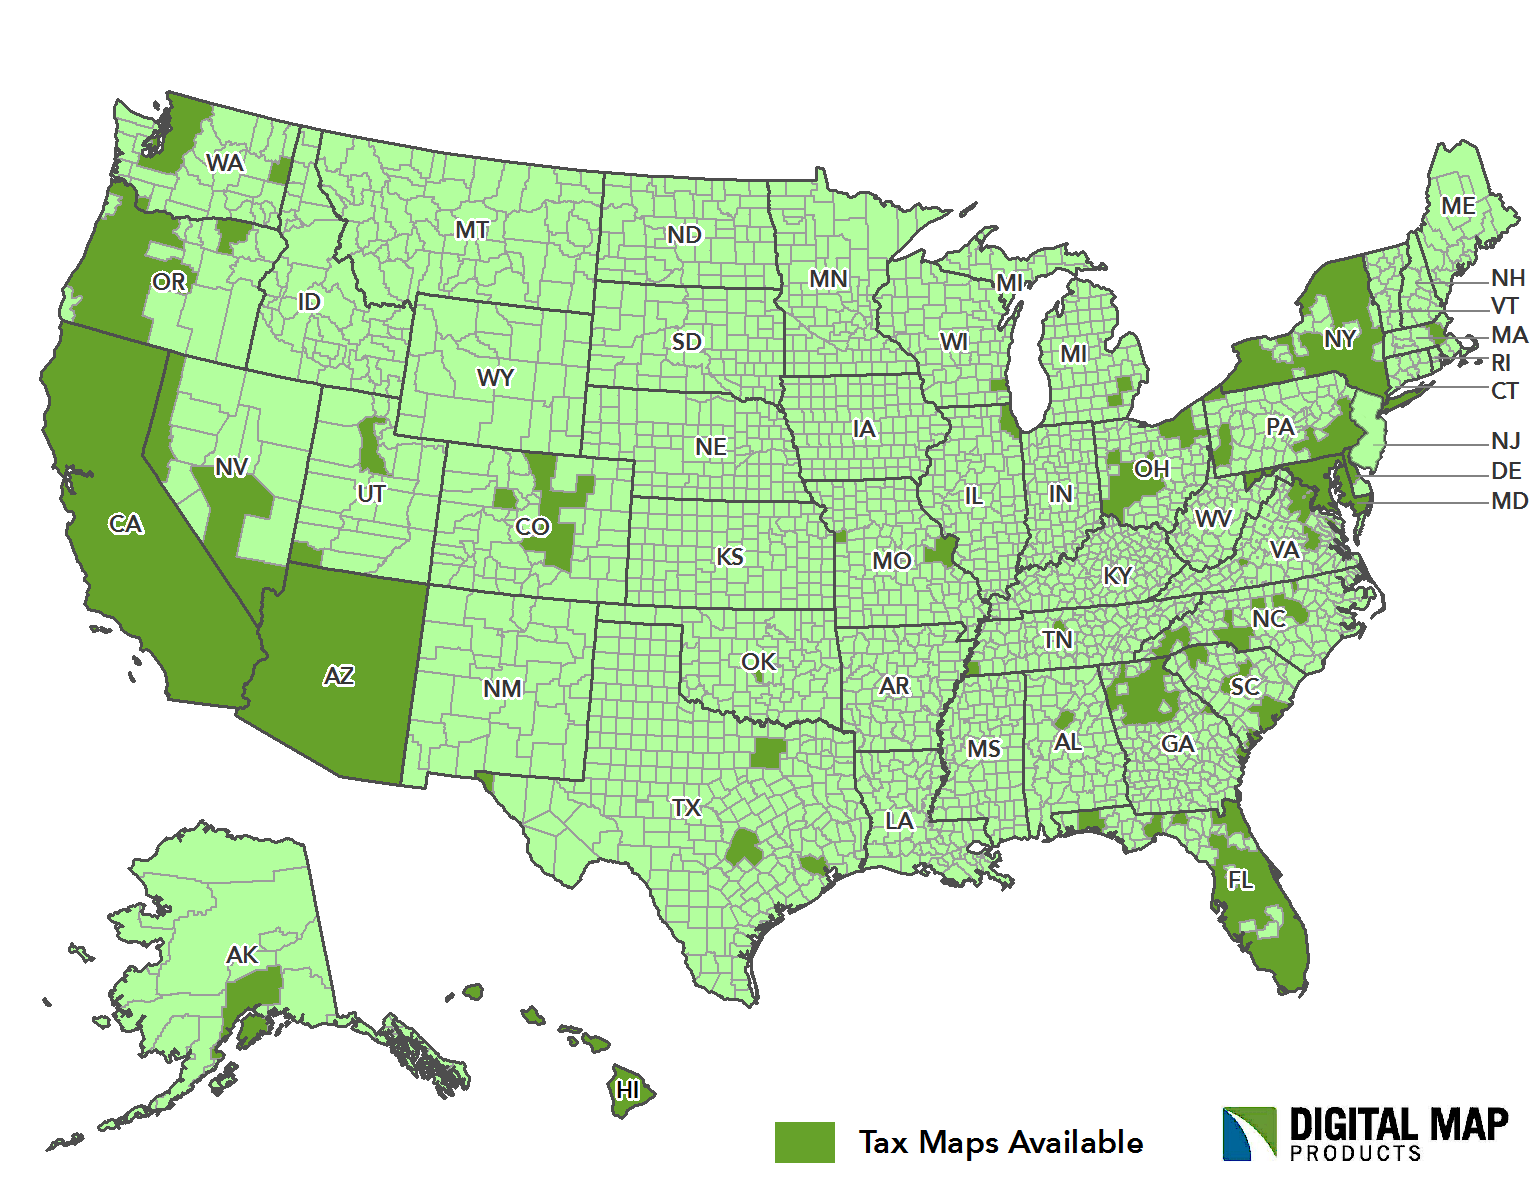 LandVision Tax Maps Coverage Map